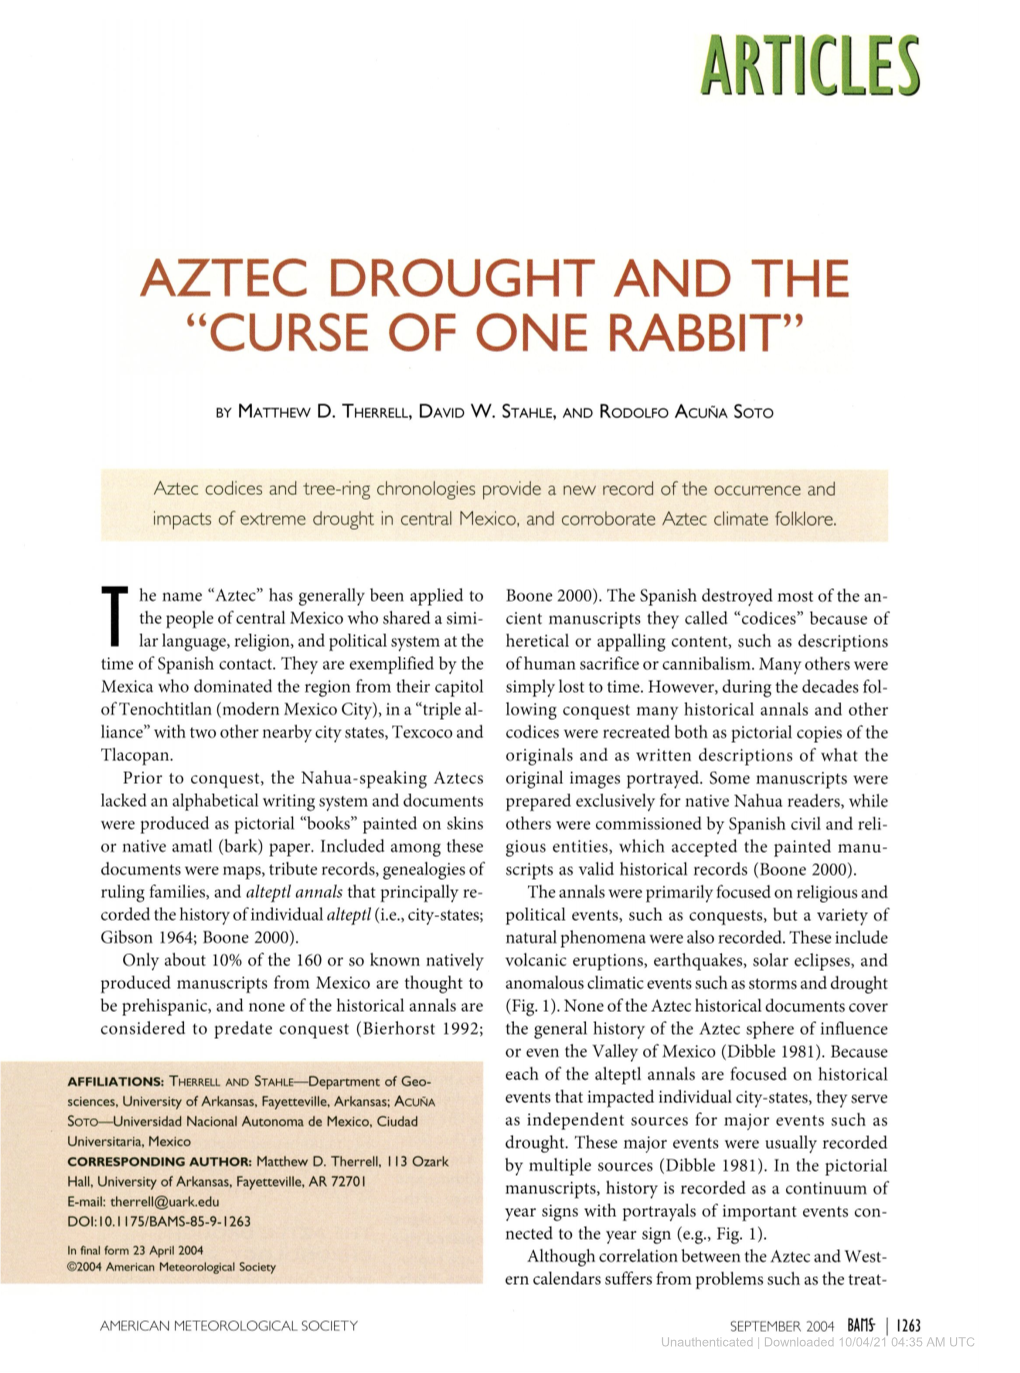 Aztec Drought and the "Curse of One Rabbit"